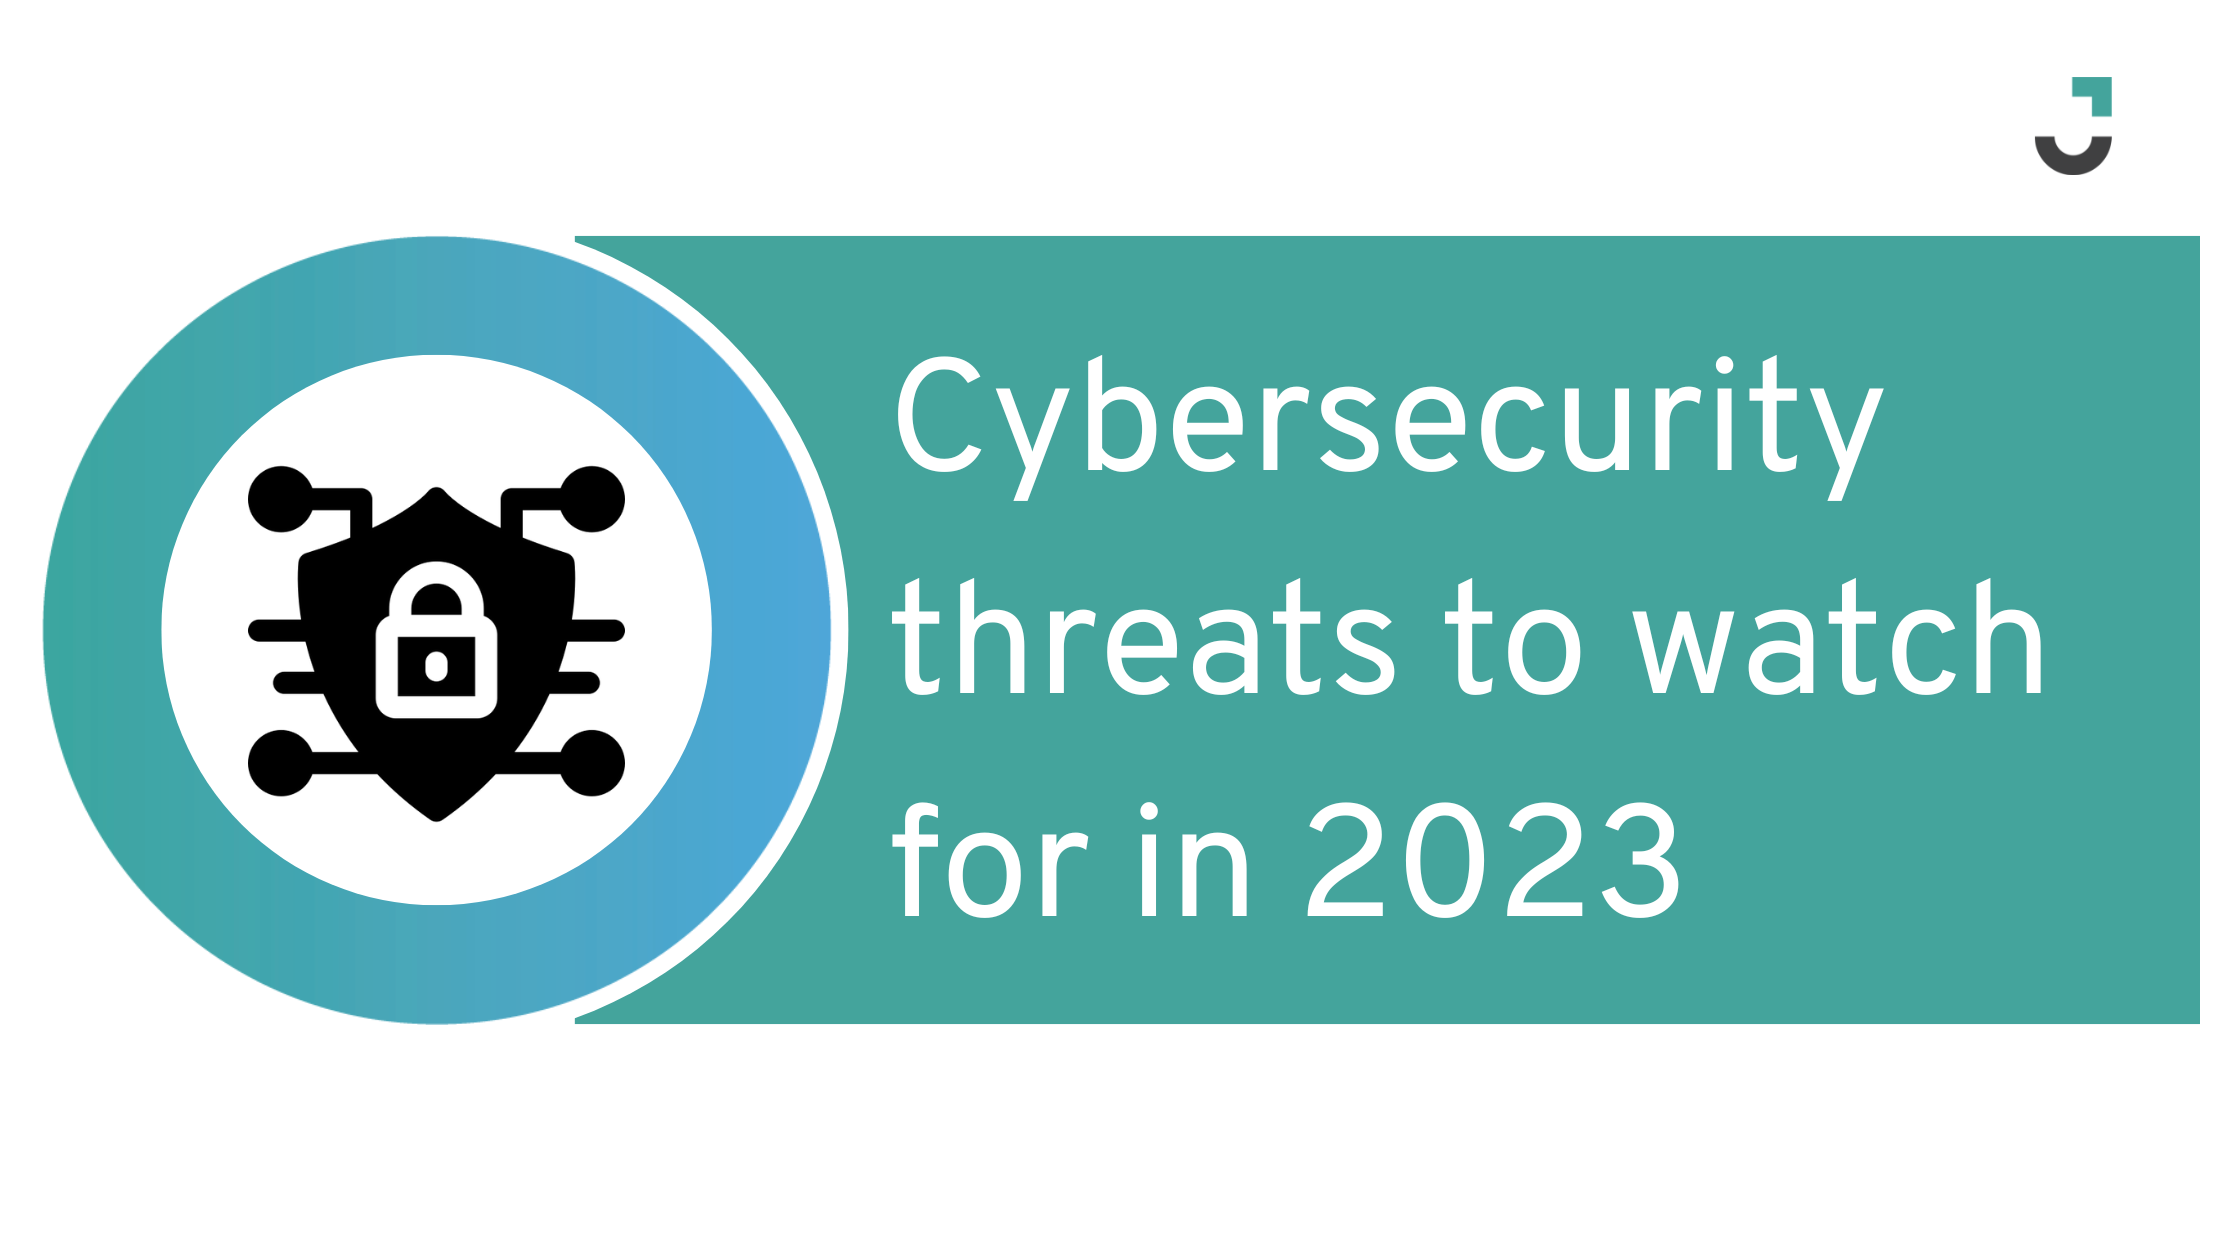 Cybersecurity threats to watch for in 2023